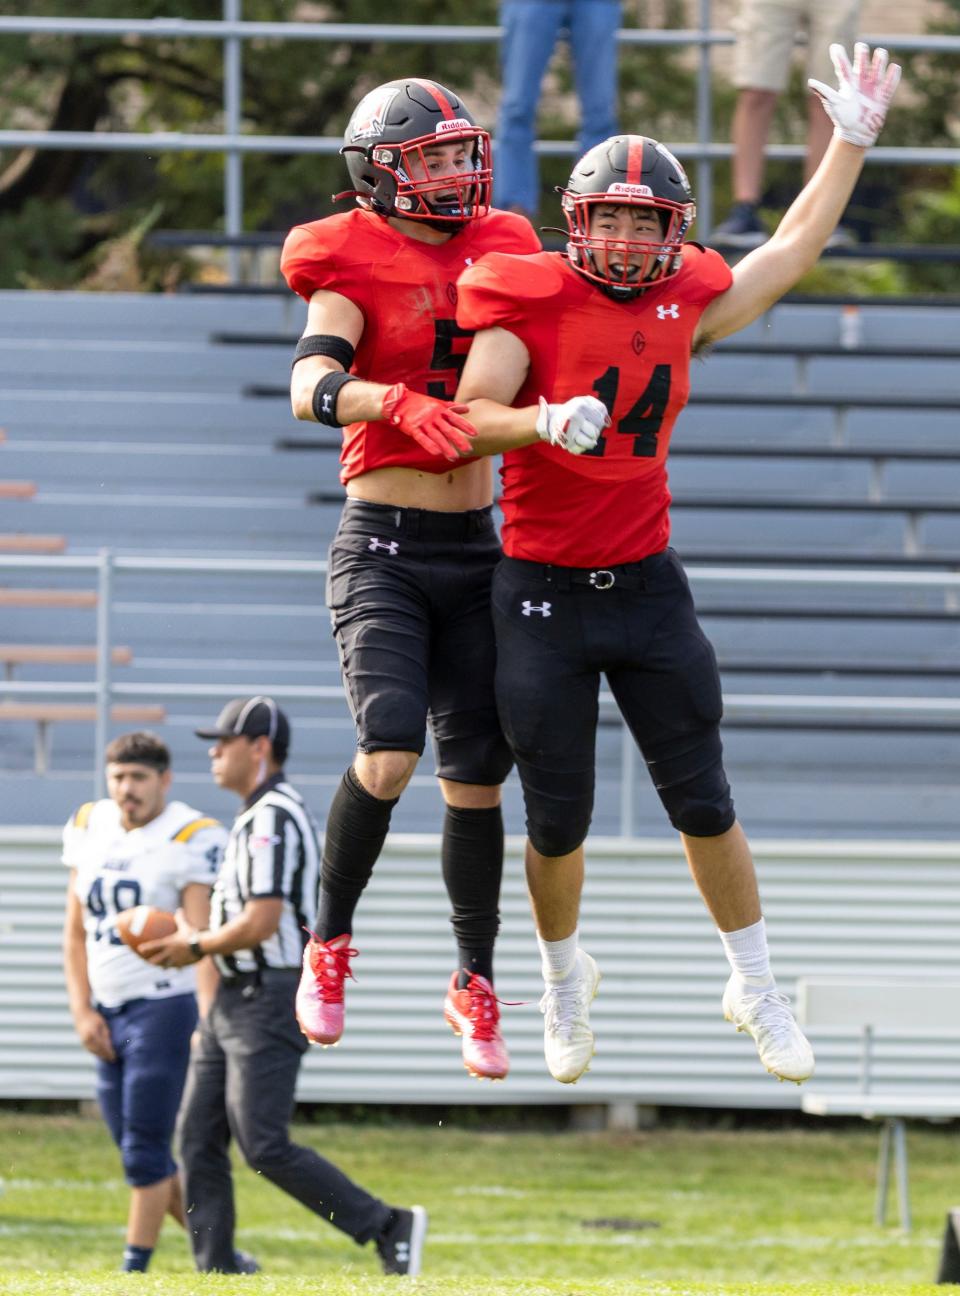 Grinnell College’s Davis Cooper and Jio Hong celebrate after a defensive stop in the fourth quarter against Beloit on Oct. 1 in Grinnell.